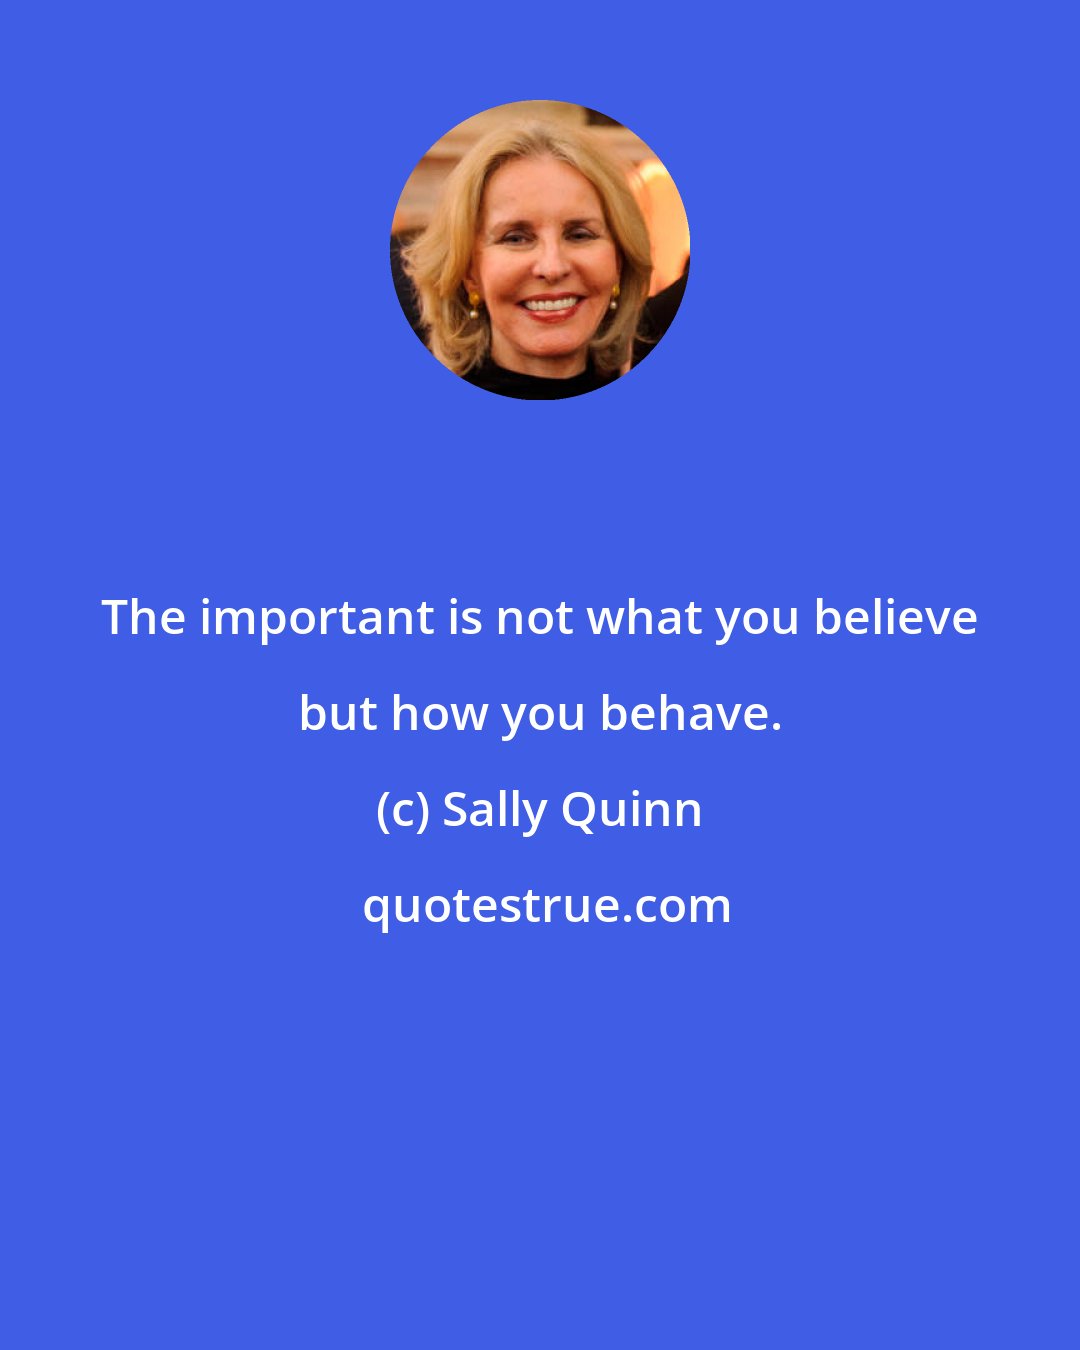 Sally Quinn: The important is not what you believe but how you behave.